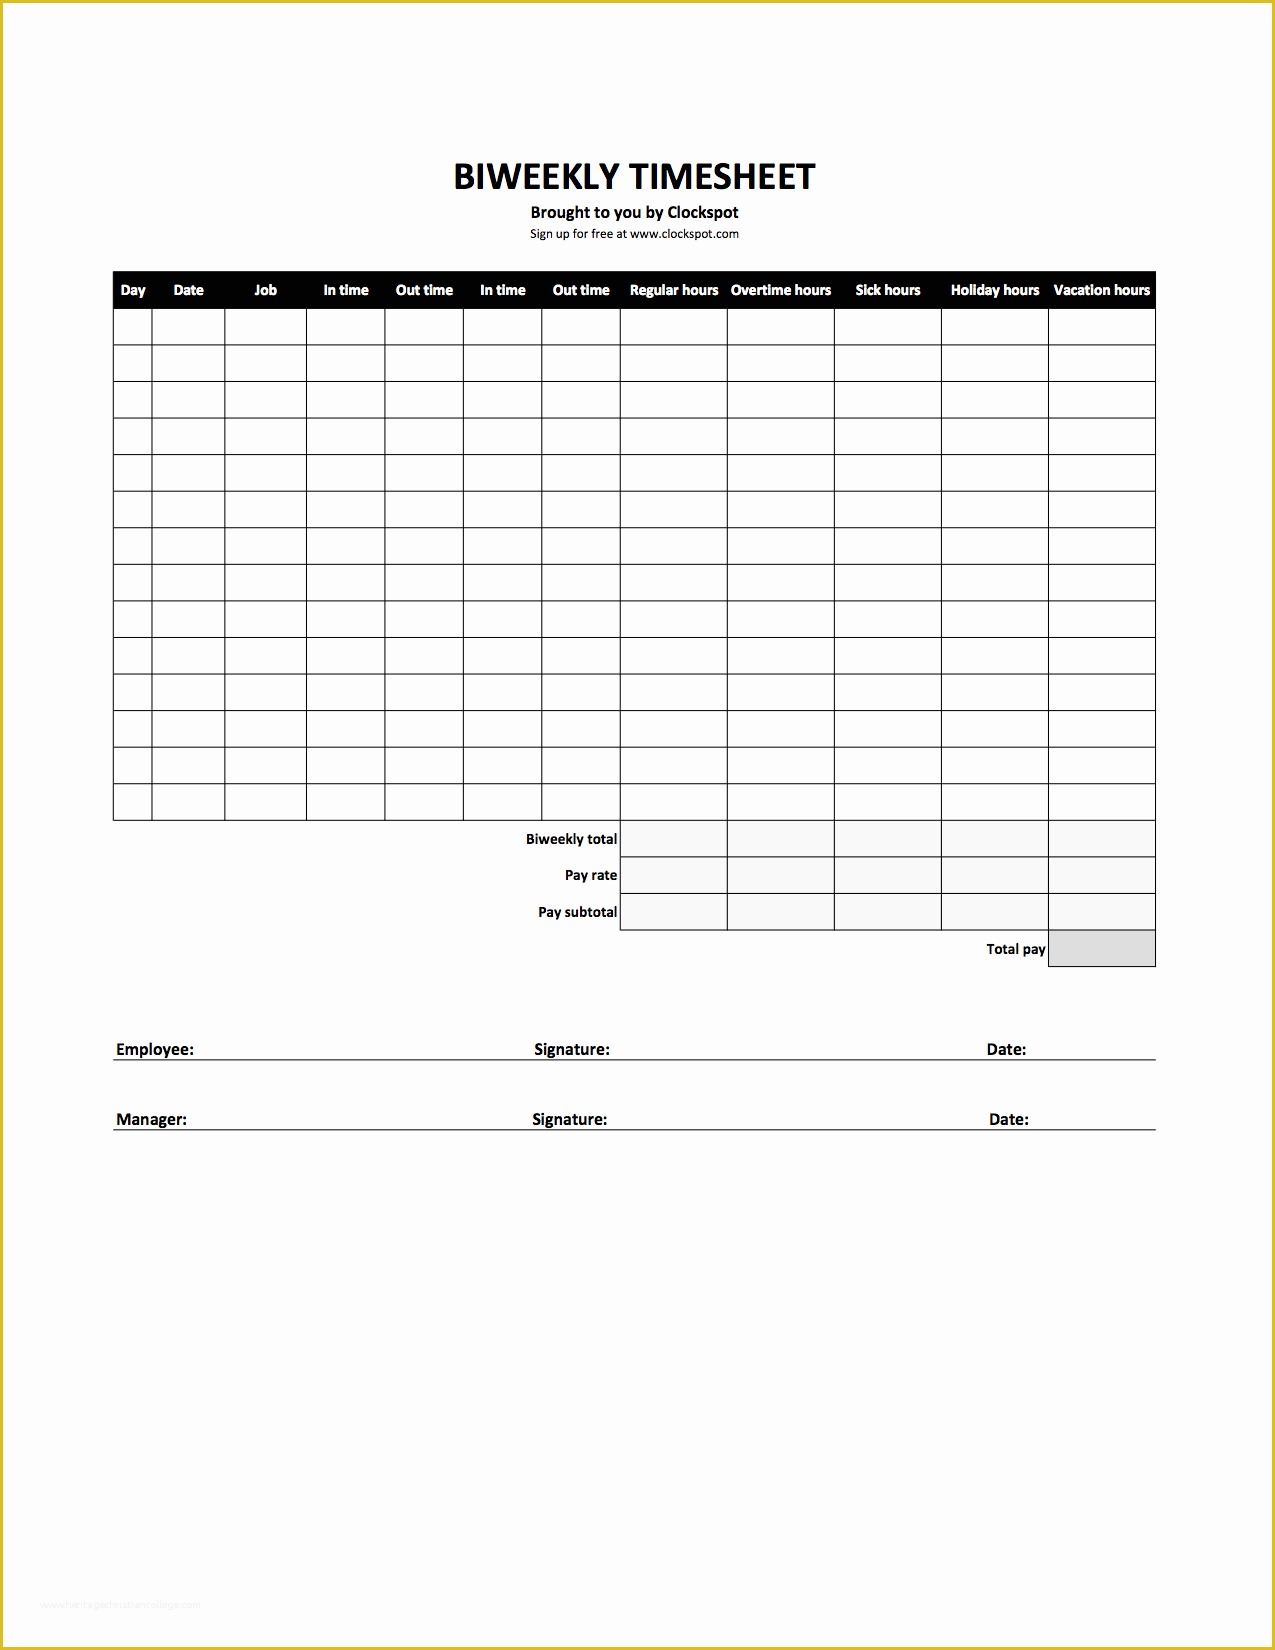 Free Excel Biweekly Timesheet Template Of Free Time Tracking Spreadsheets